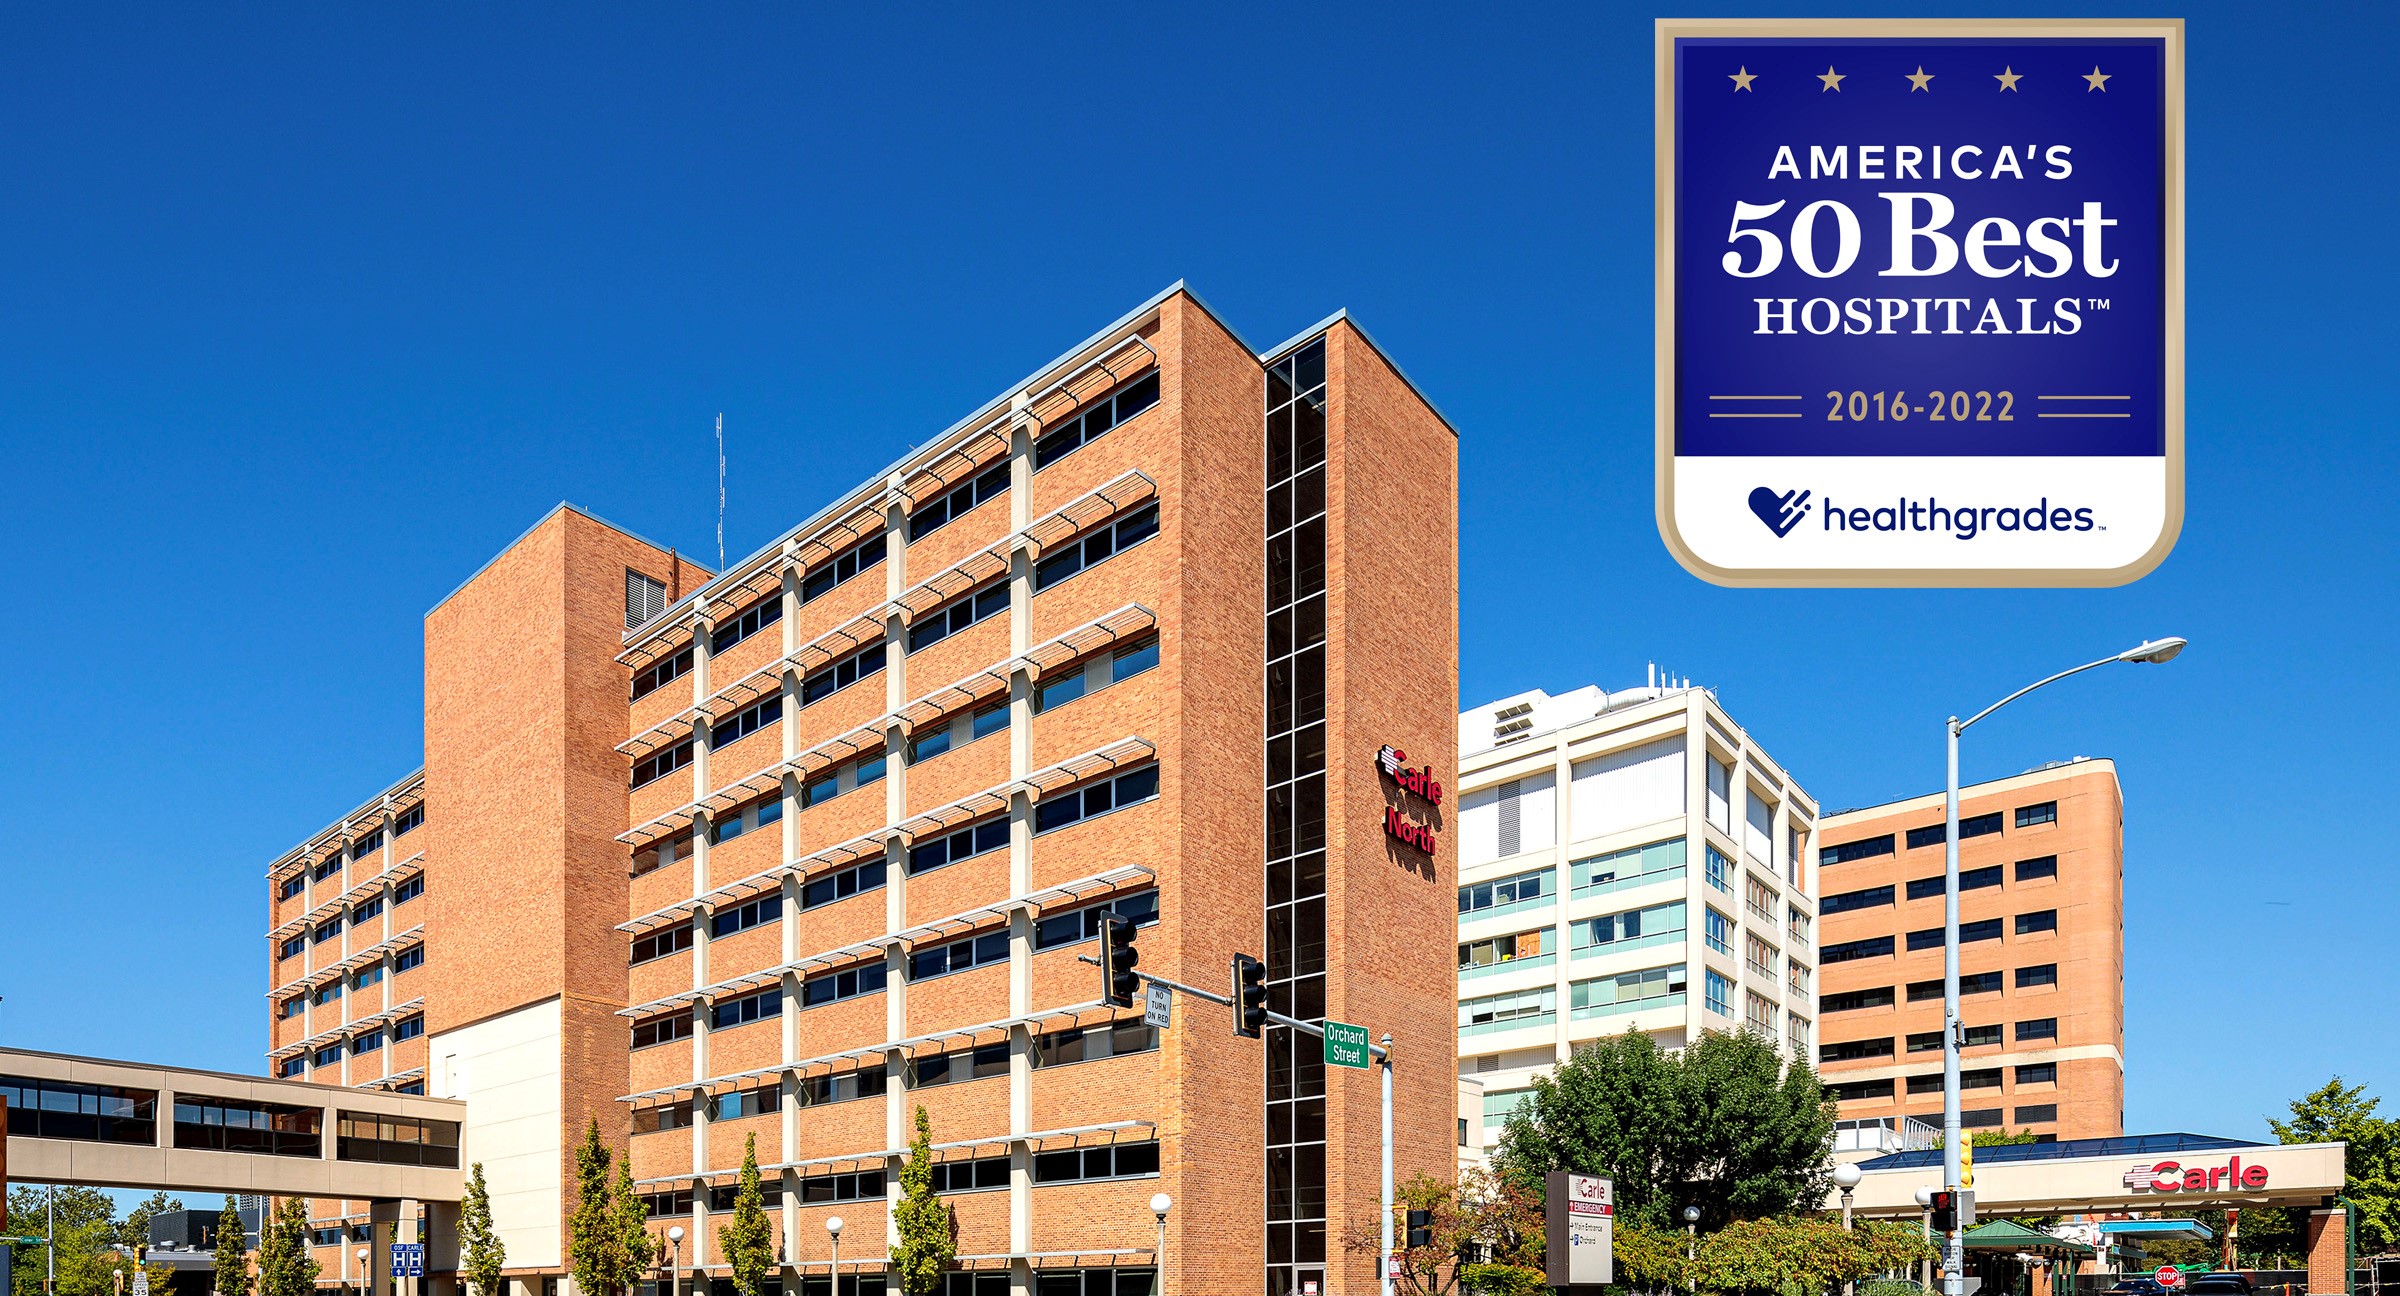 Carle recognized as America’s 50 Best Hospitals™ for the 7th year